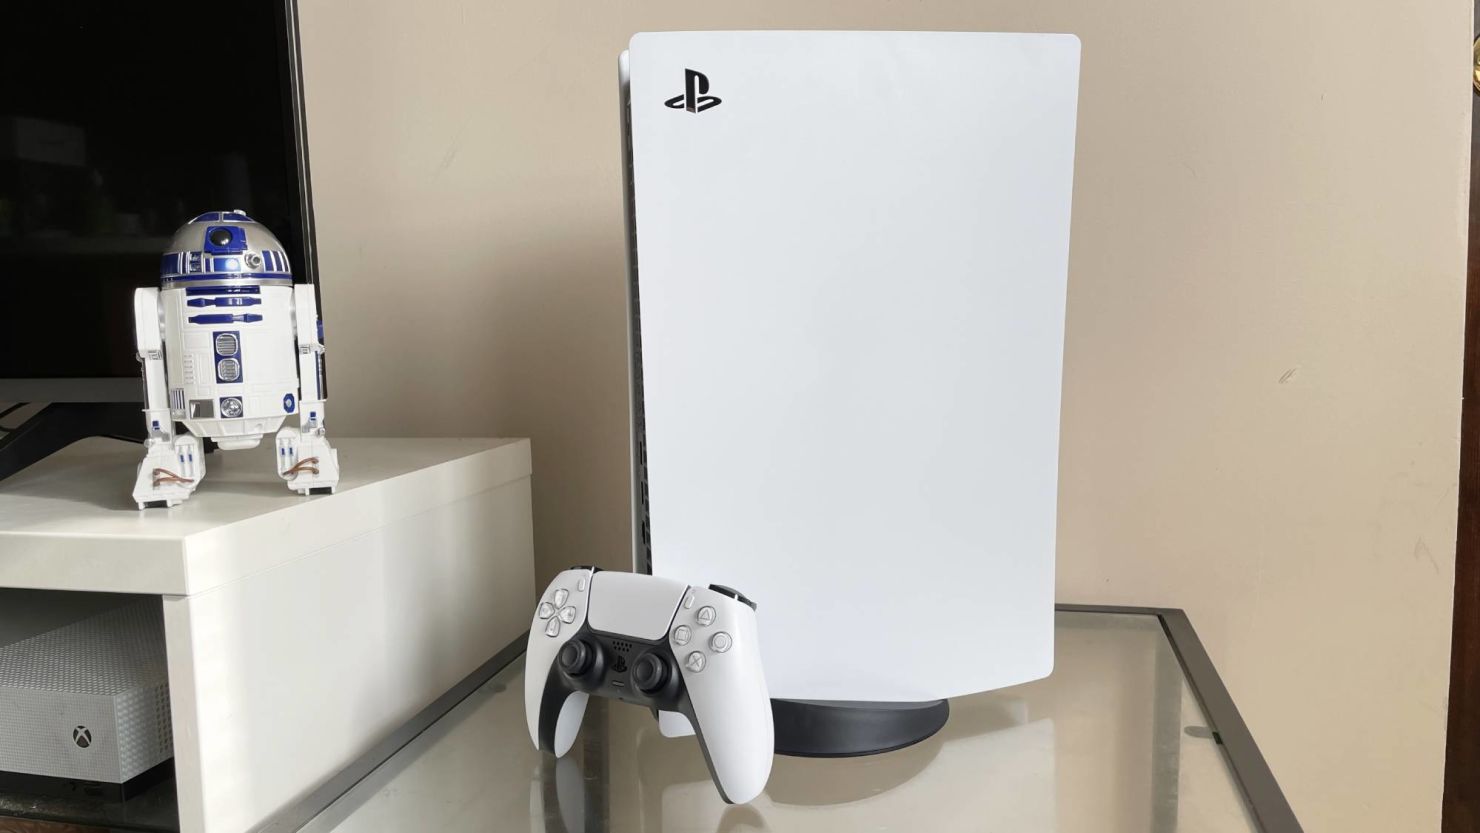 PS5 hands-on and unboxing: See Sony's giant new console up close